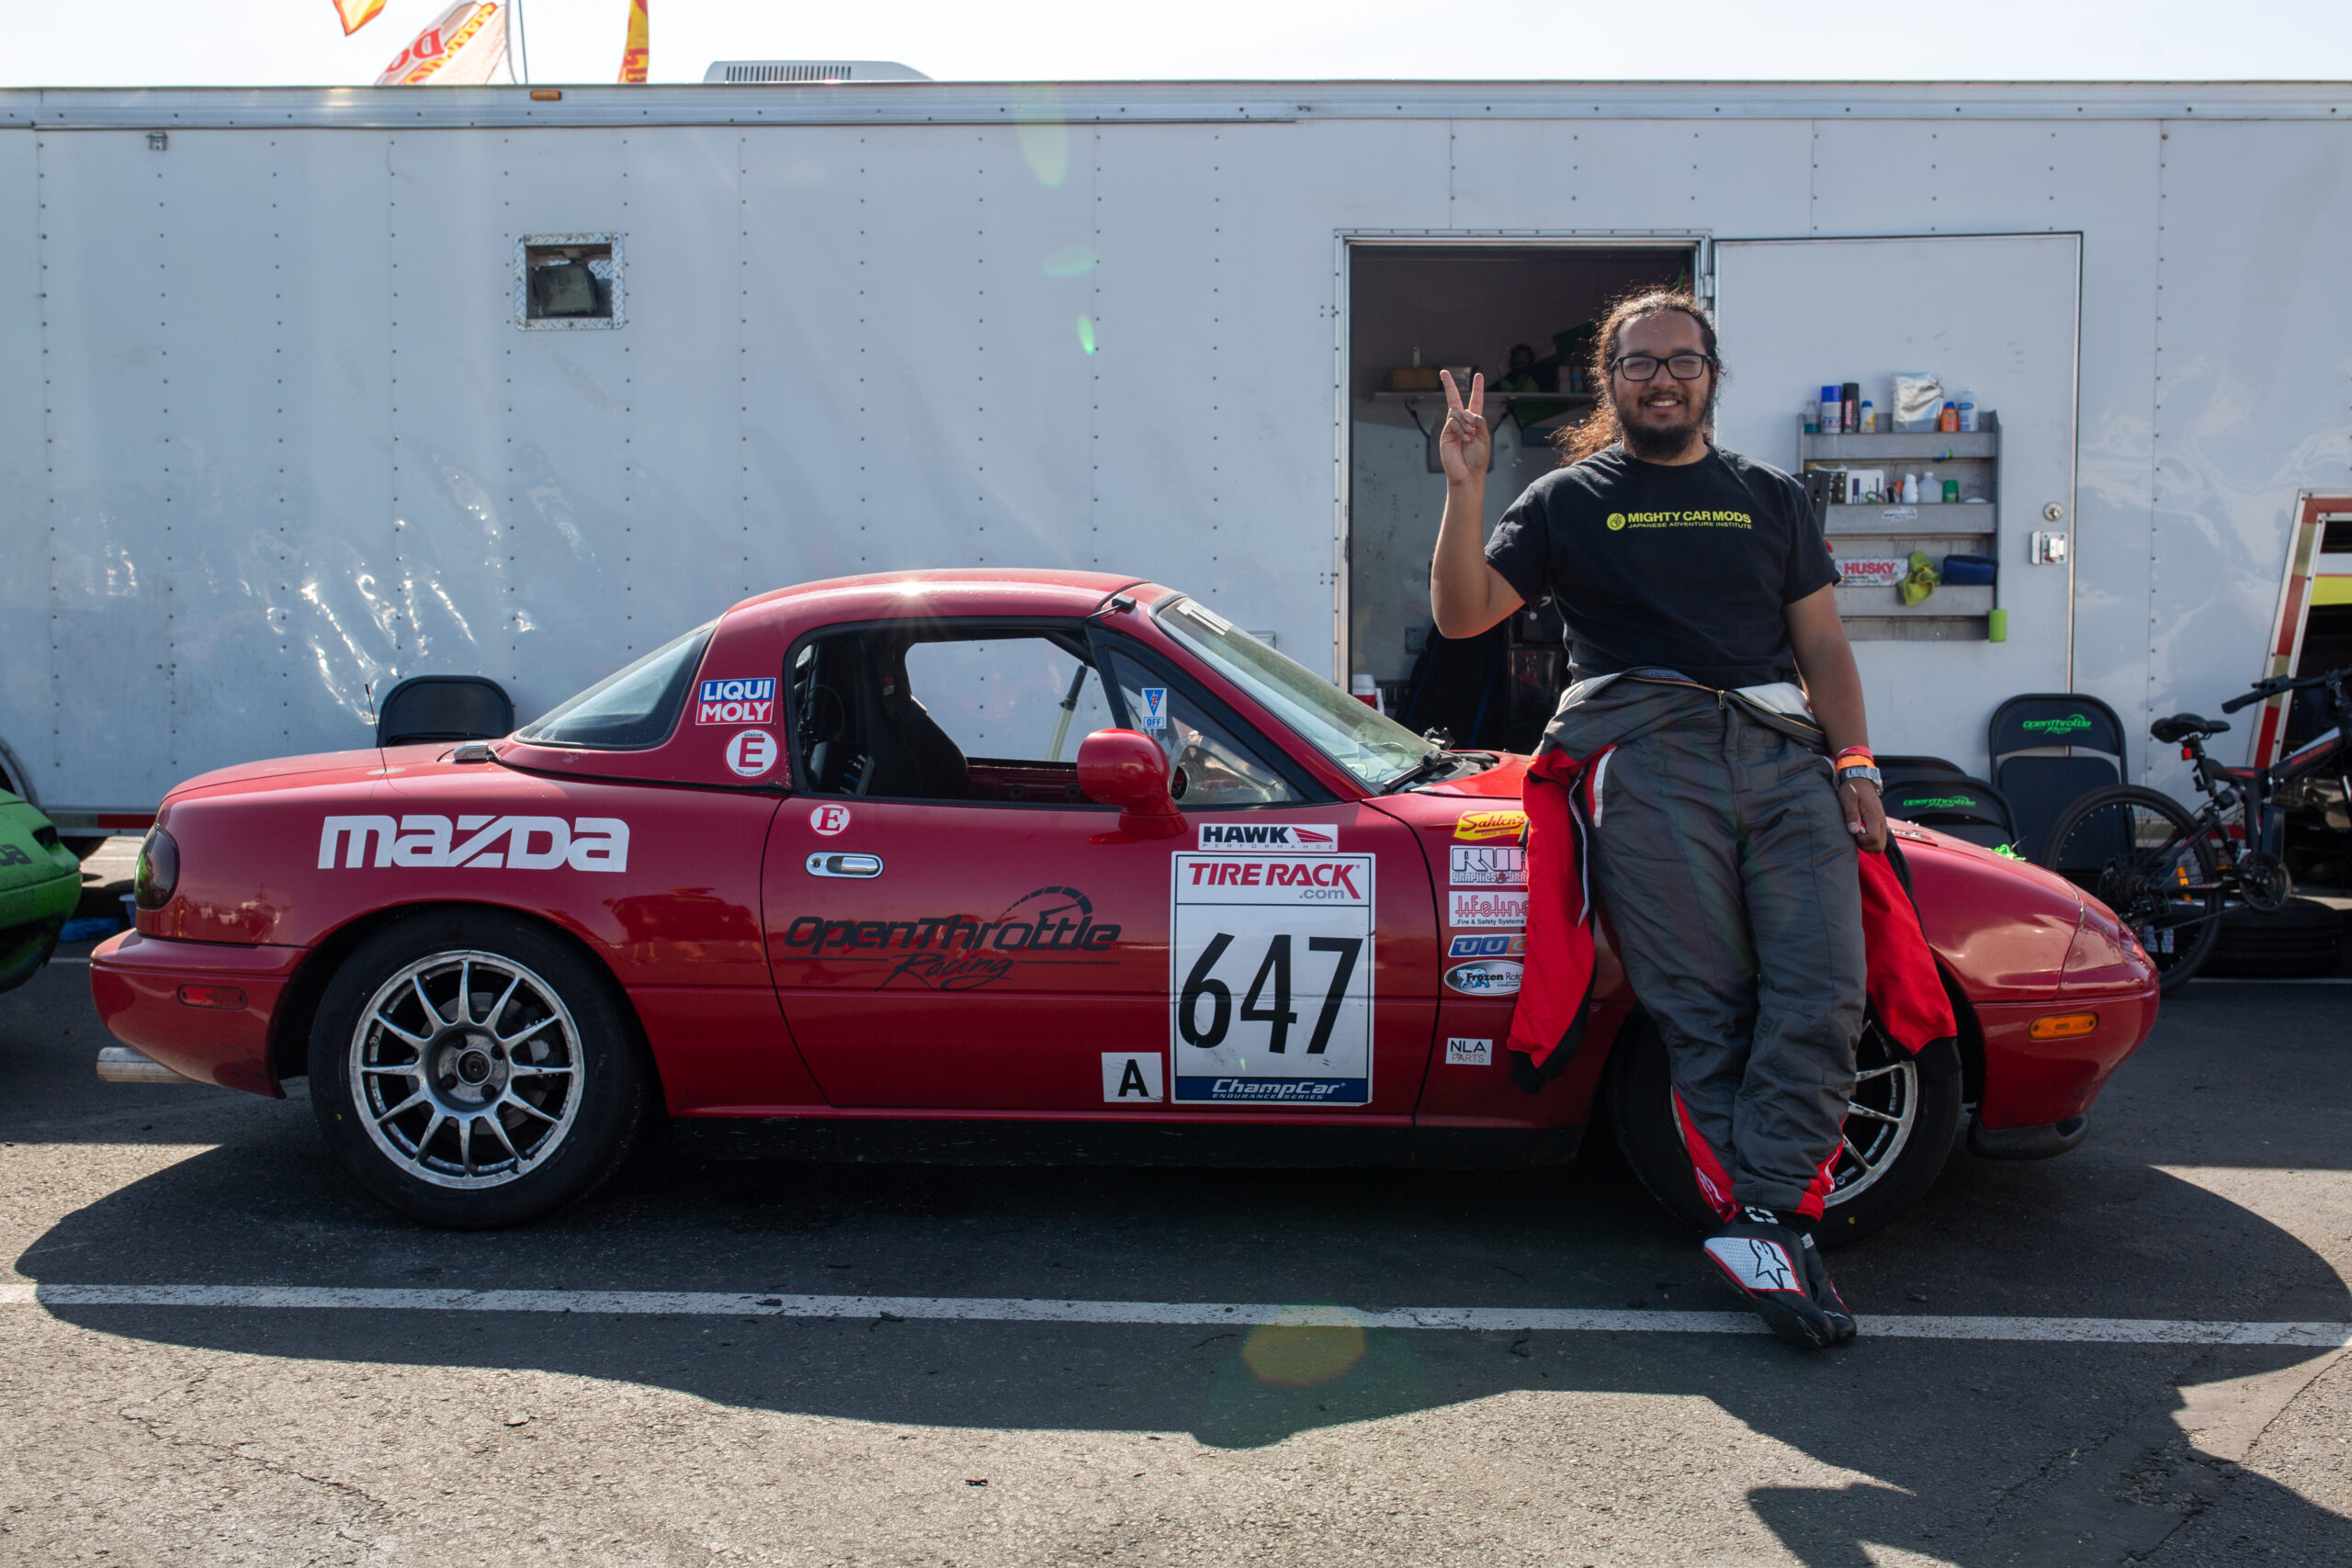 Wheel-to-Wheel Racing for the First Time at Watkins Glen Changed My Life